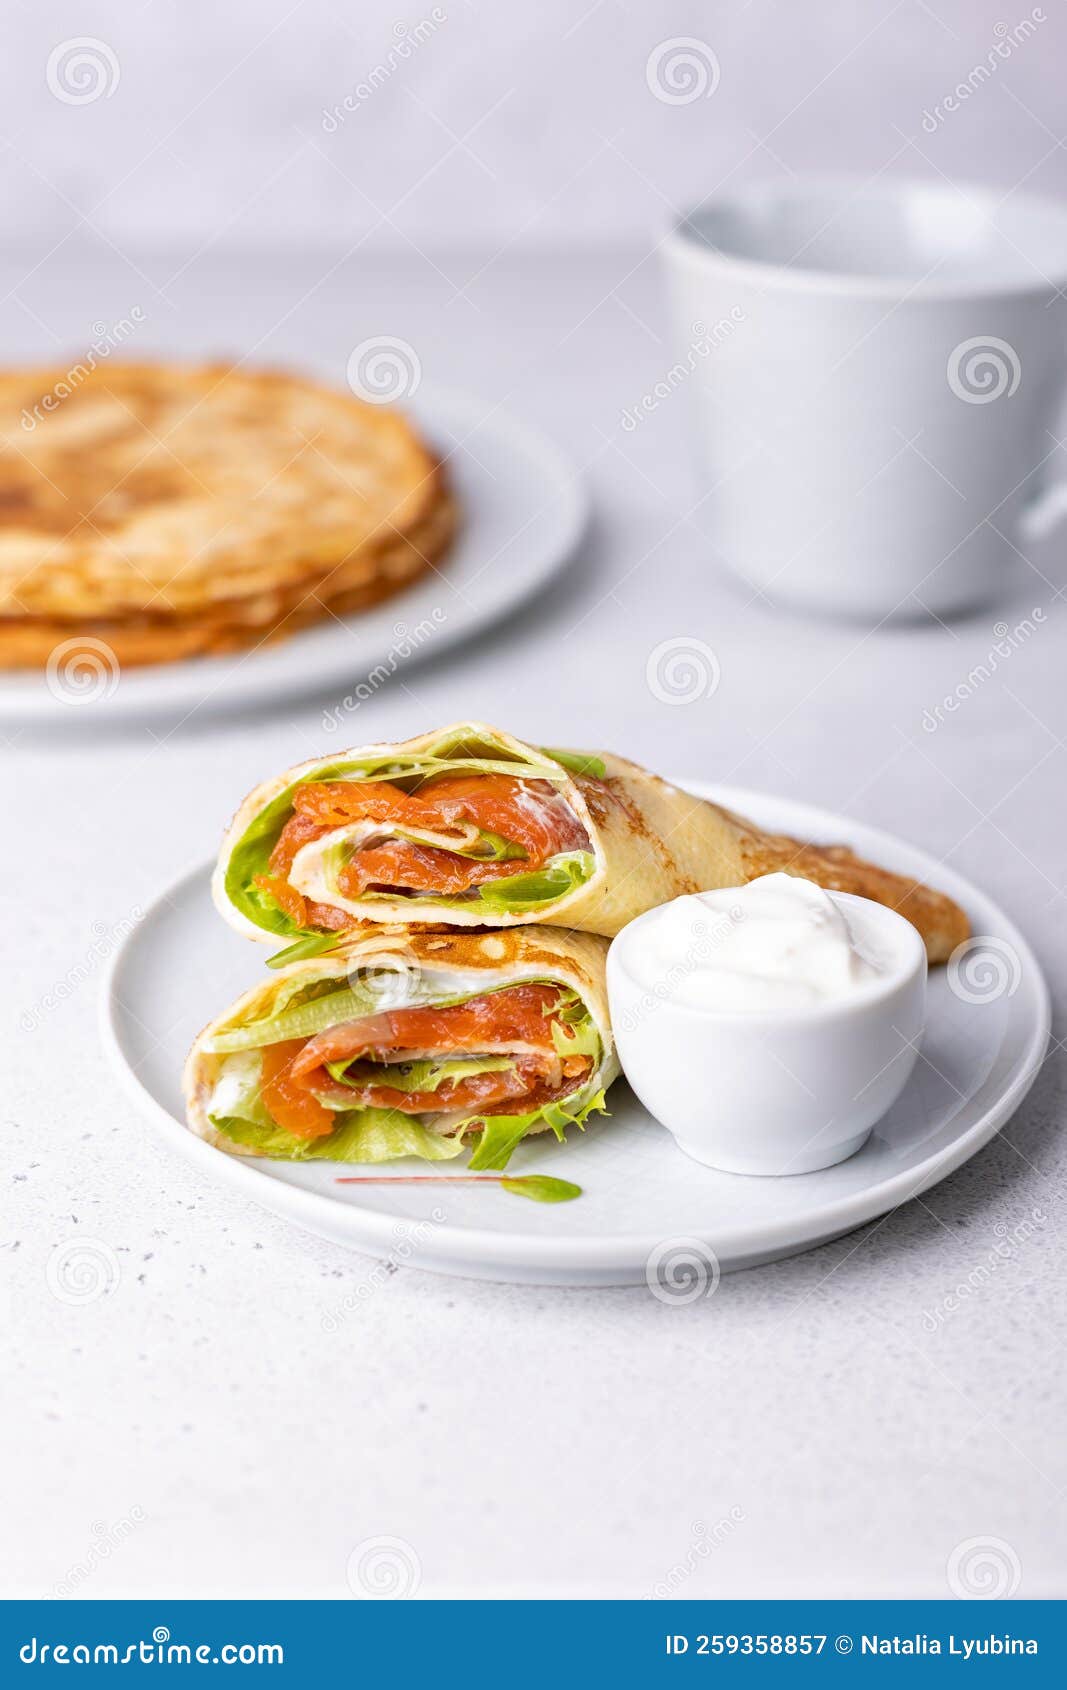 pancakes with salmon trout, sour cream and greenstuff. thin, not sweet blinchiki stuffed with fish. traditional russian dish.